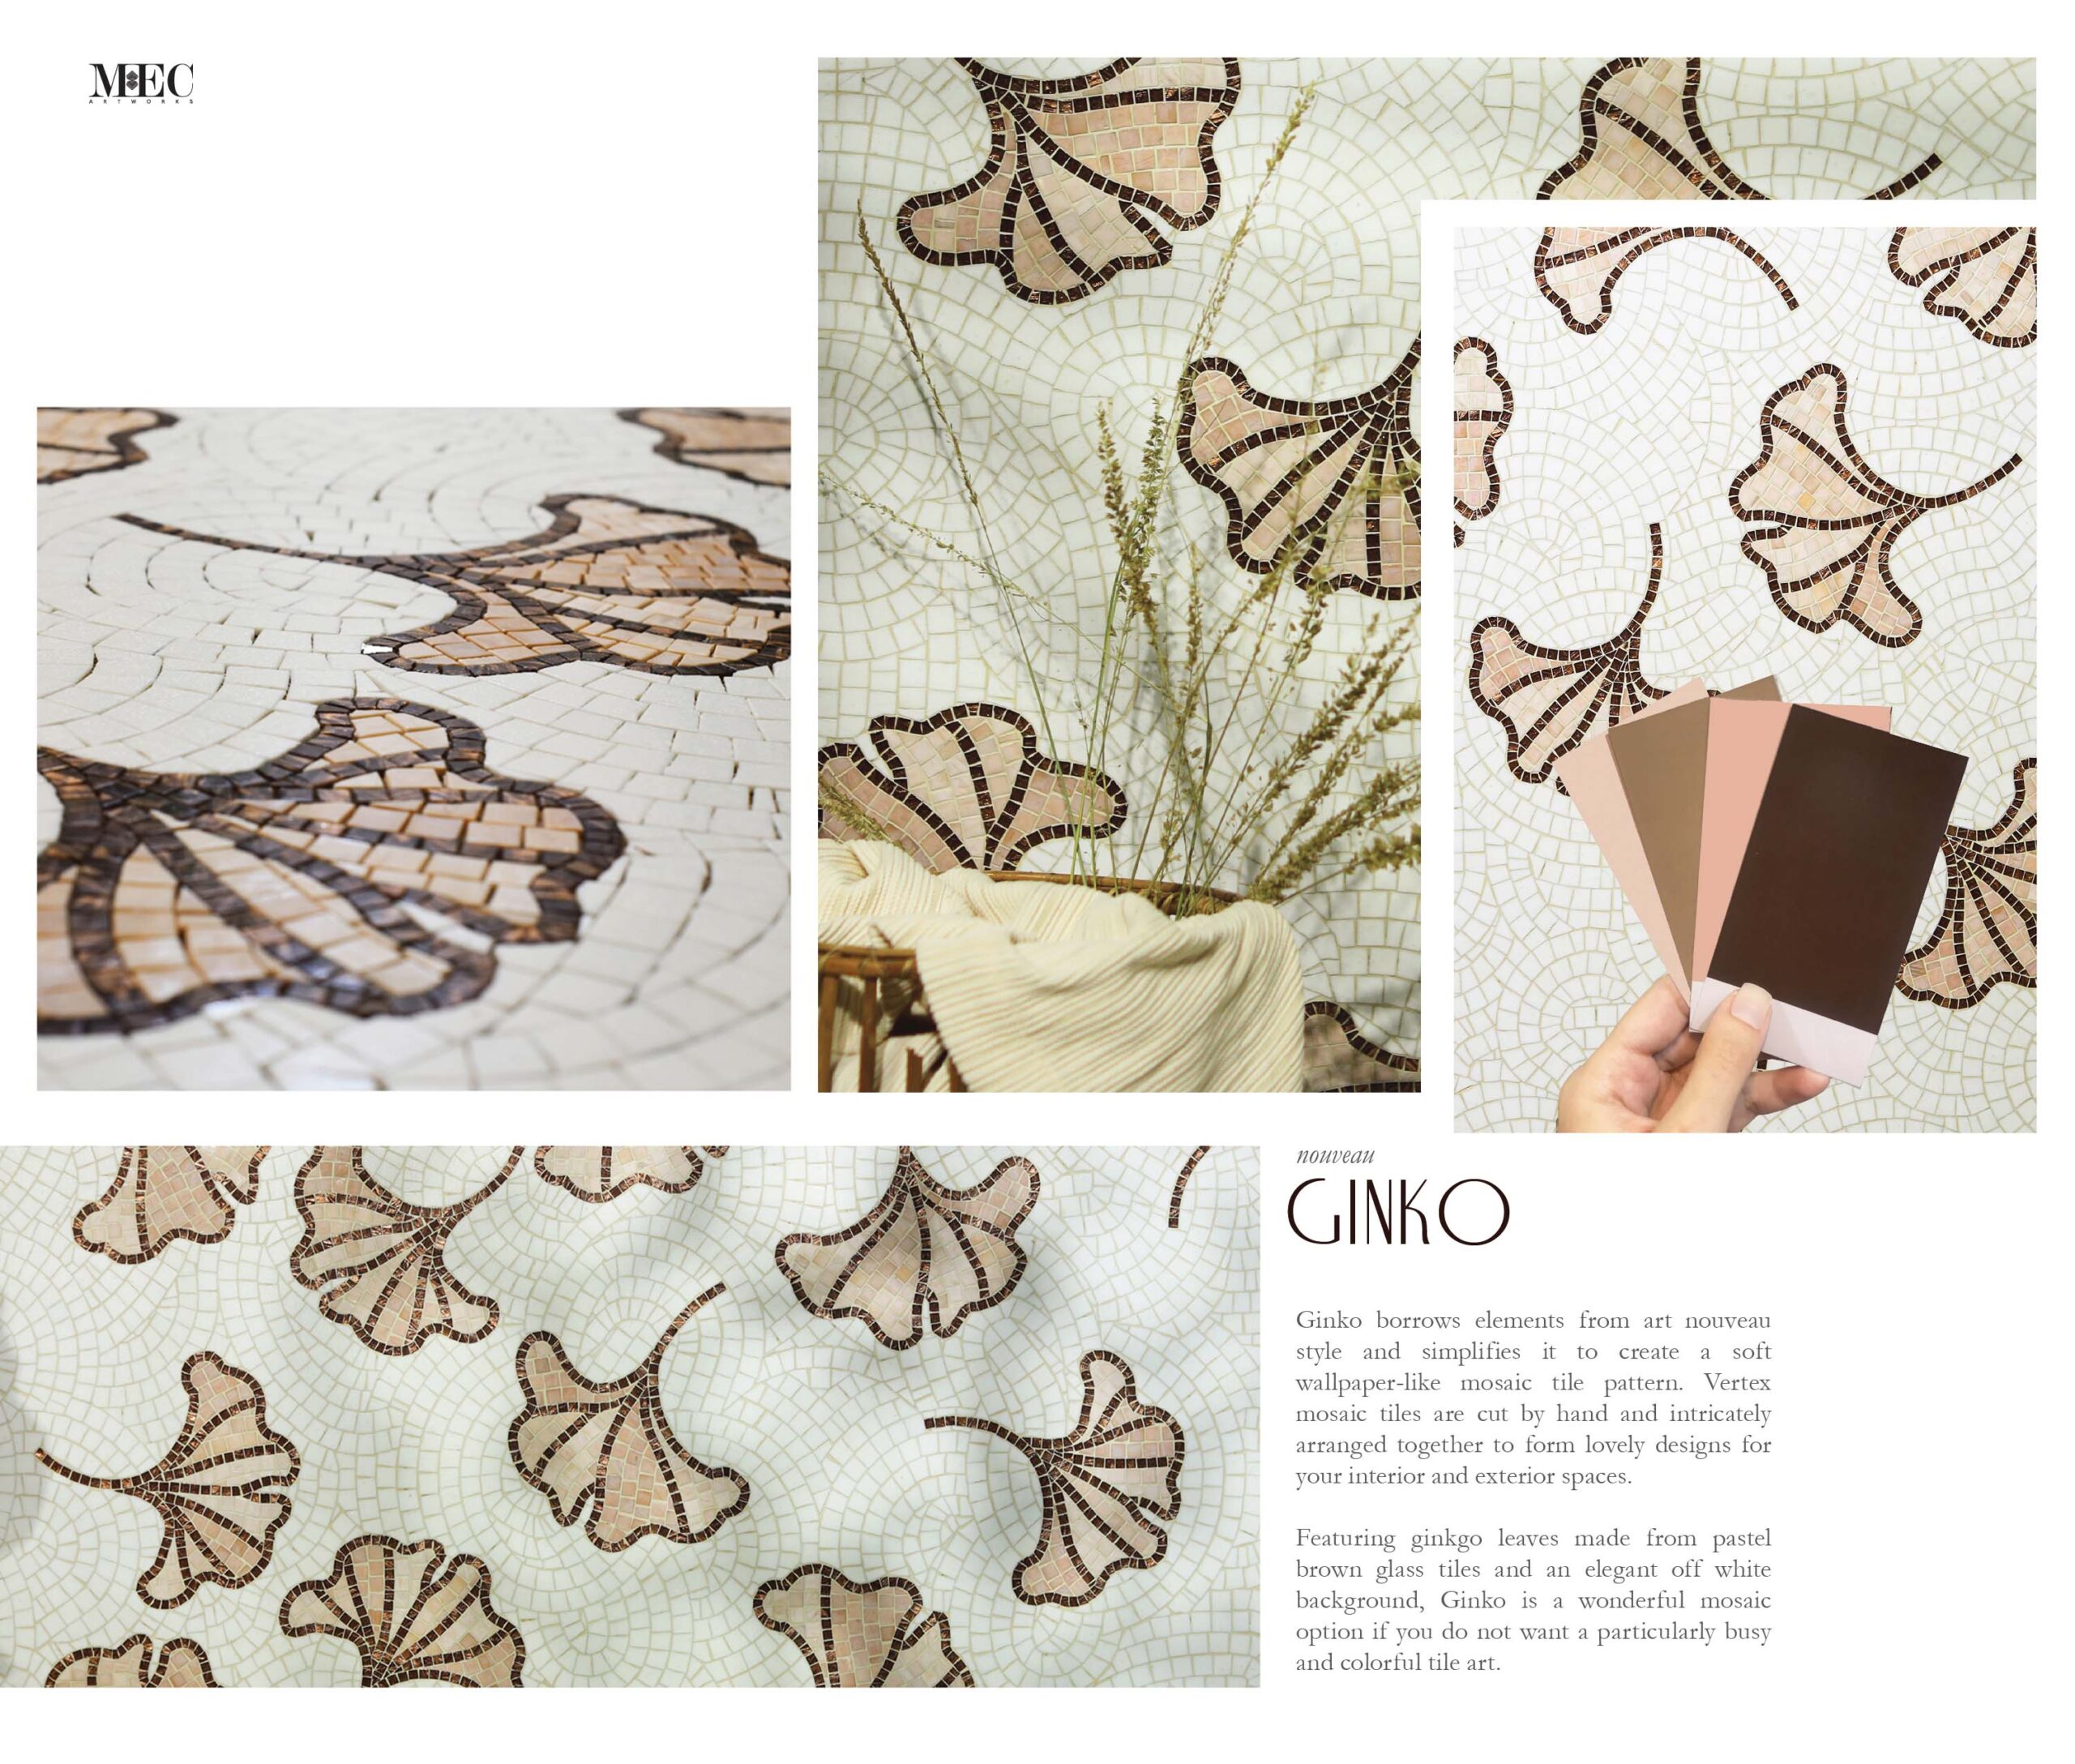 
A mood board featuring ginkgo leaf designs. The mosaic artwork of ginkgo leaves is complemented by an earthy color palette and a textured cloth.